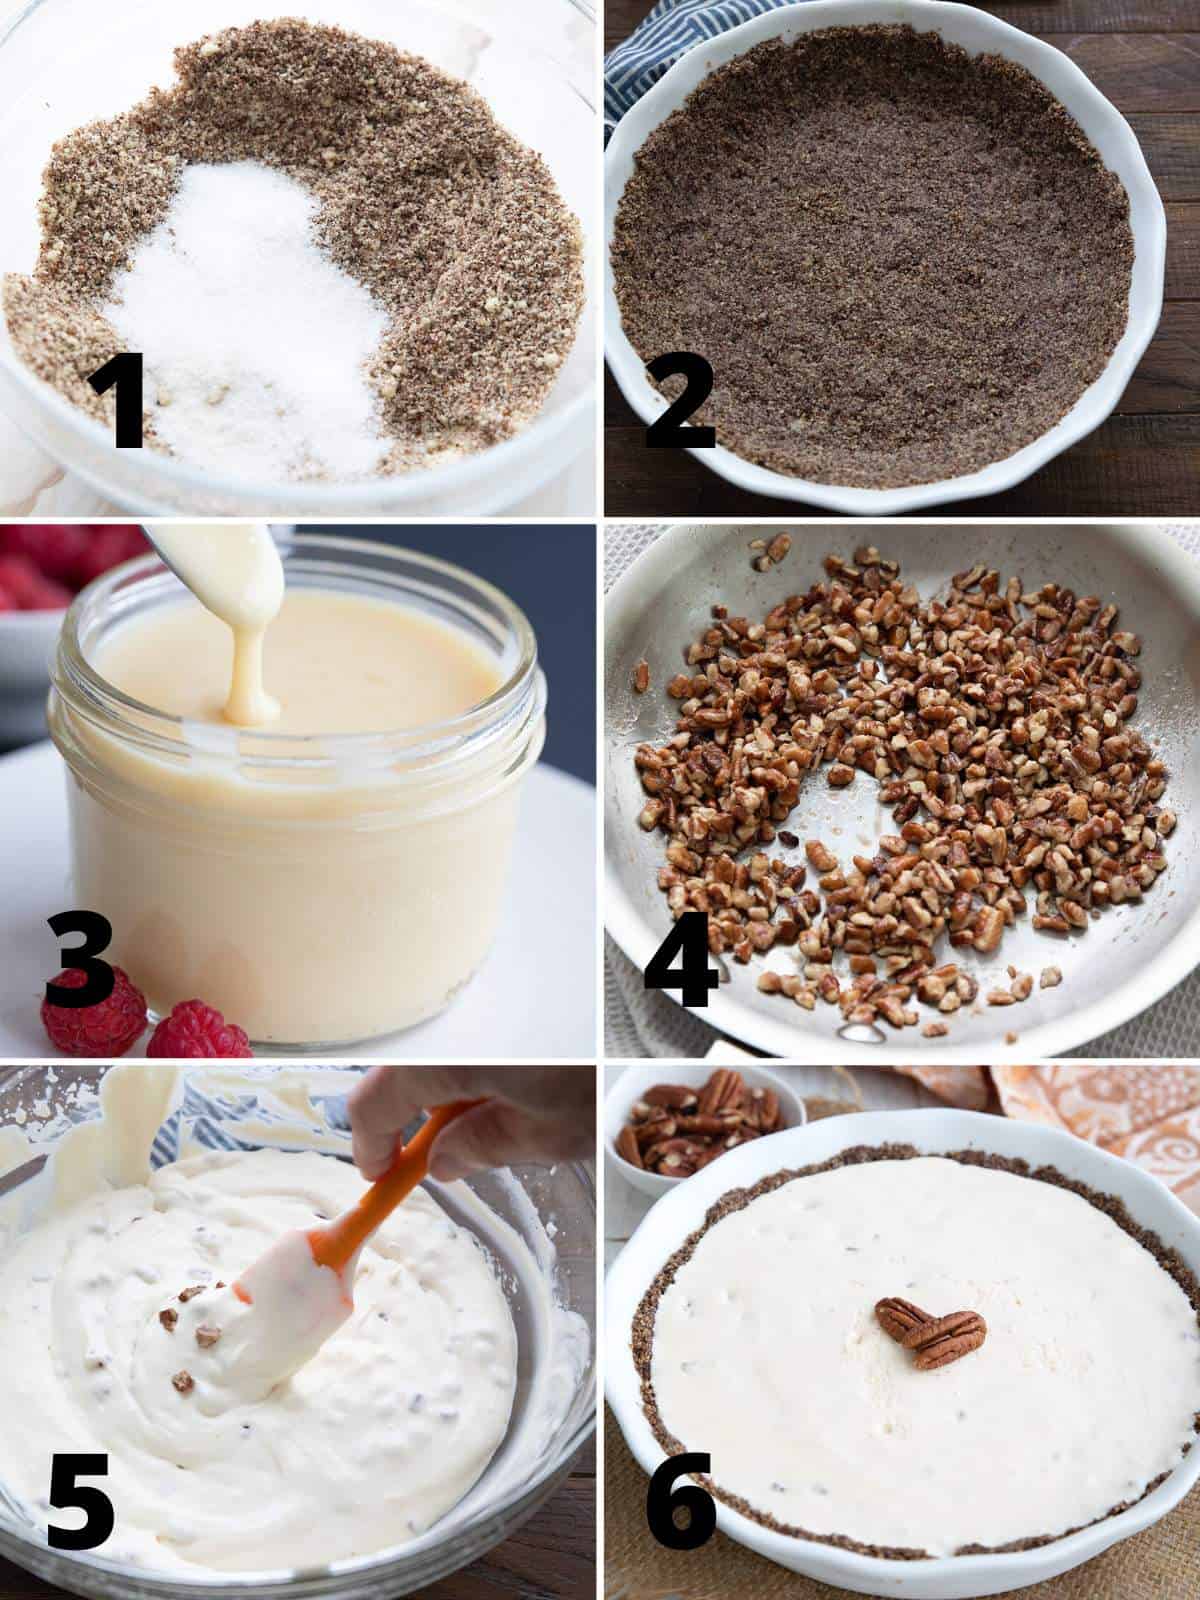 Top down image showing how to make Keto Butter Pecan Ice Cream Pie.